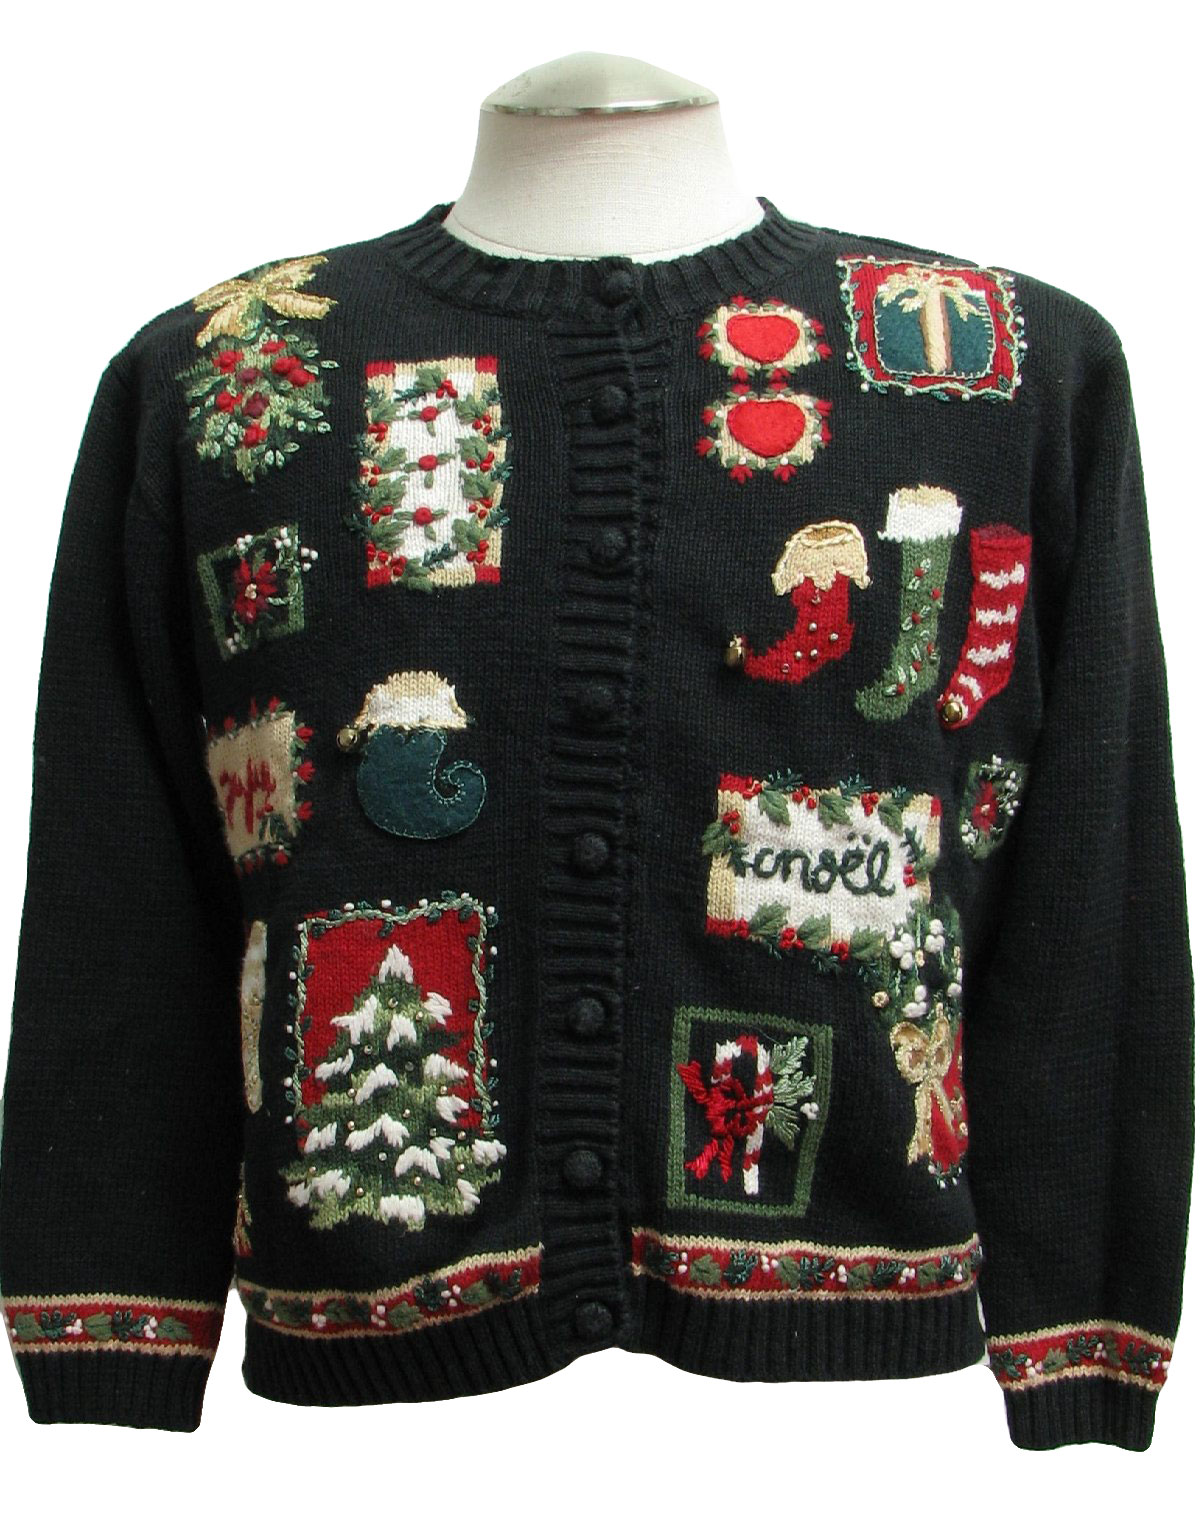 Womens Ugly Christmas Sweater: -Heirloom Collectibles- Womens black ...